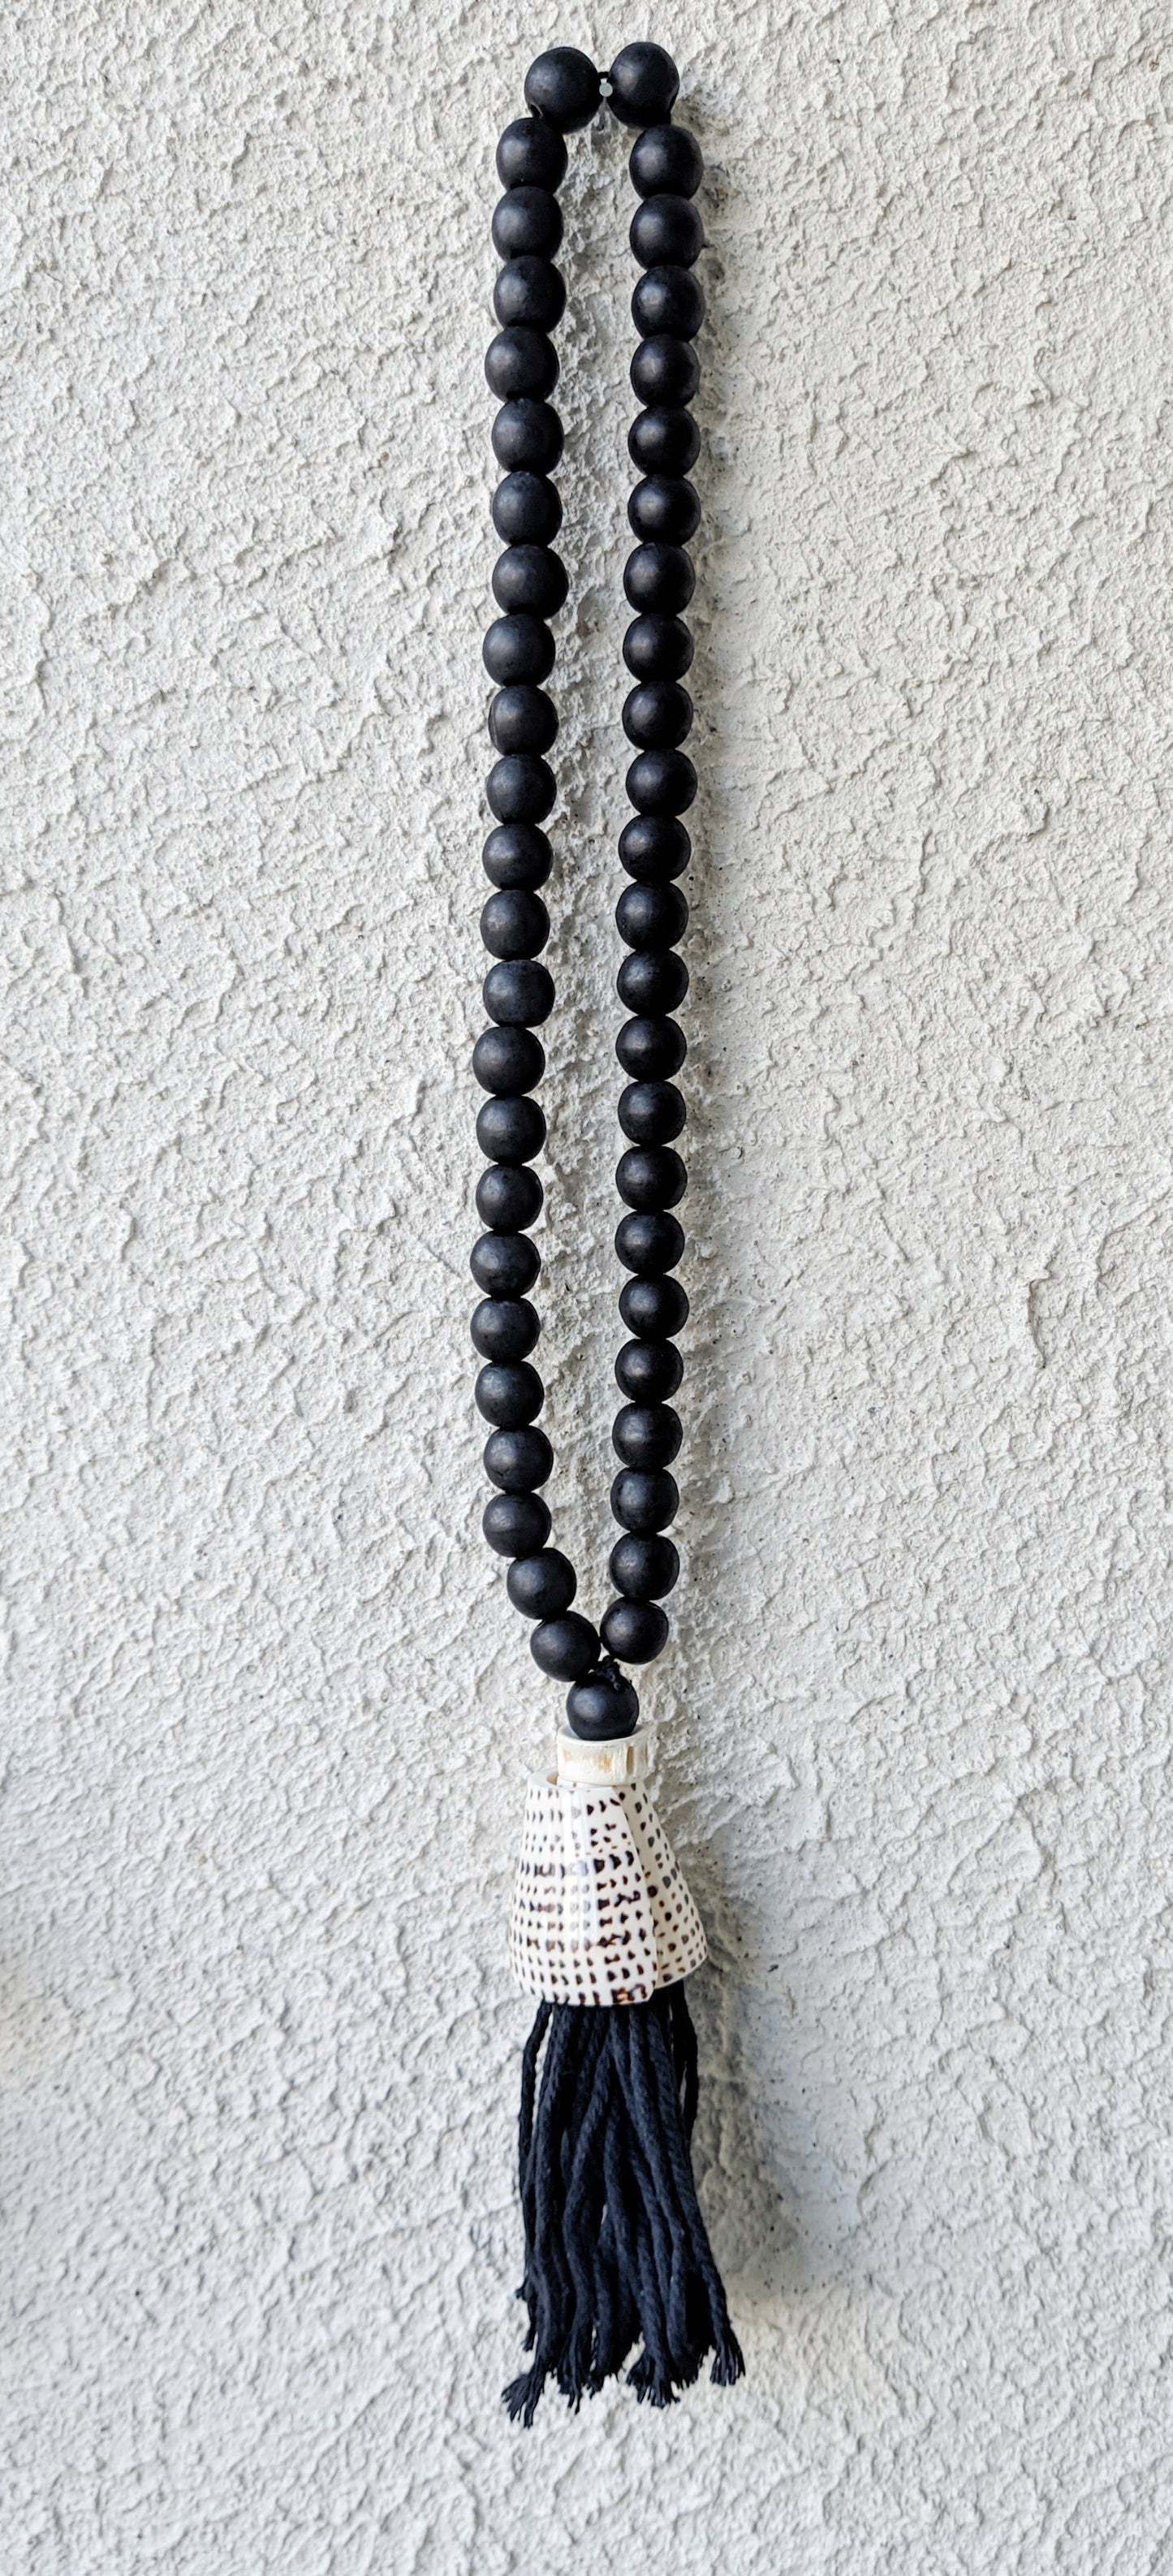 BLACK WOODEN DECOR WITH SHELL TASSEL